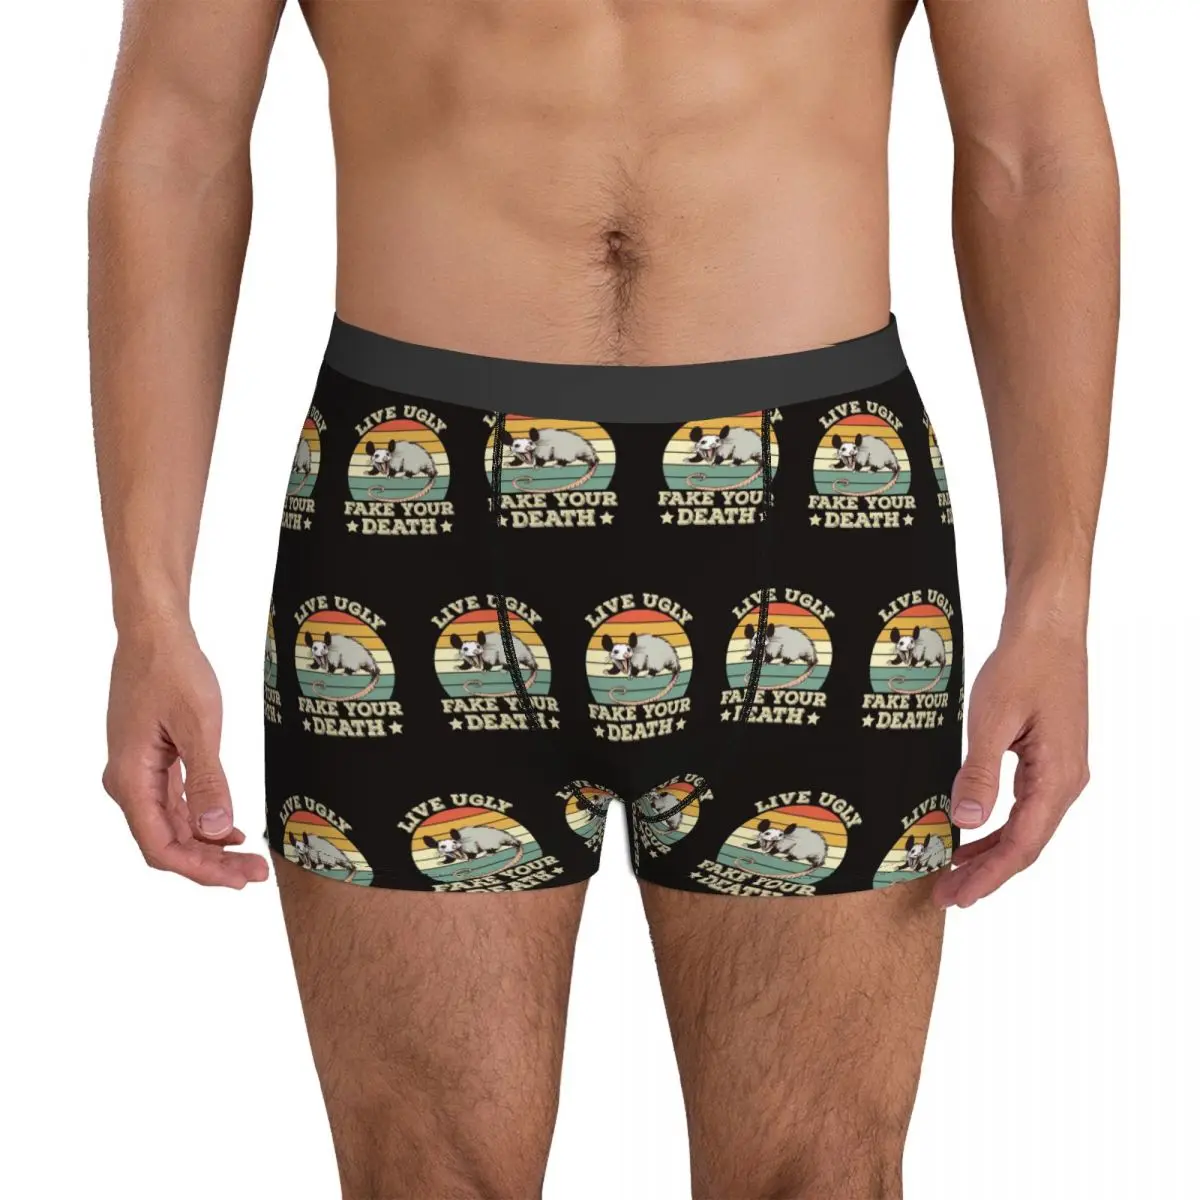 Live Ugly Fake Your Death Underwear opossum possum Males Shorts Briefs Sexy Boxer Shorts Trenky Print Plus Size Underpants